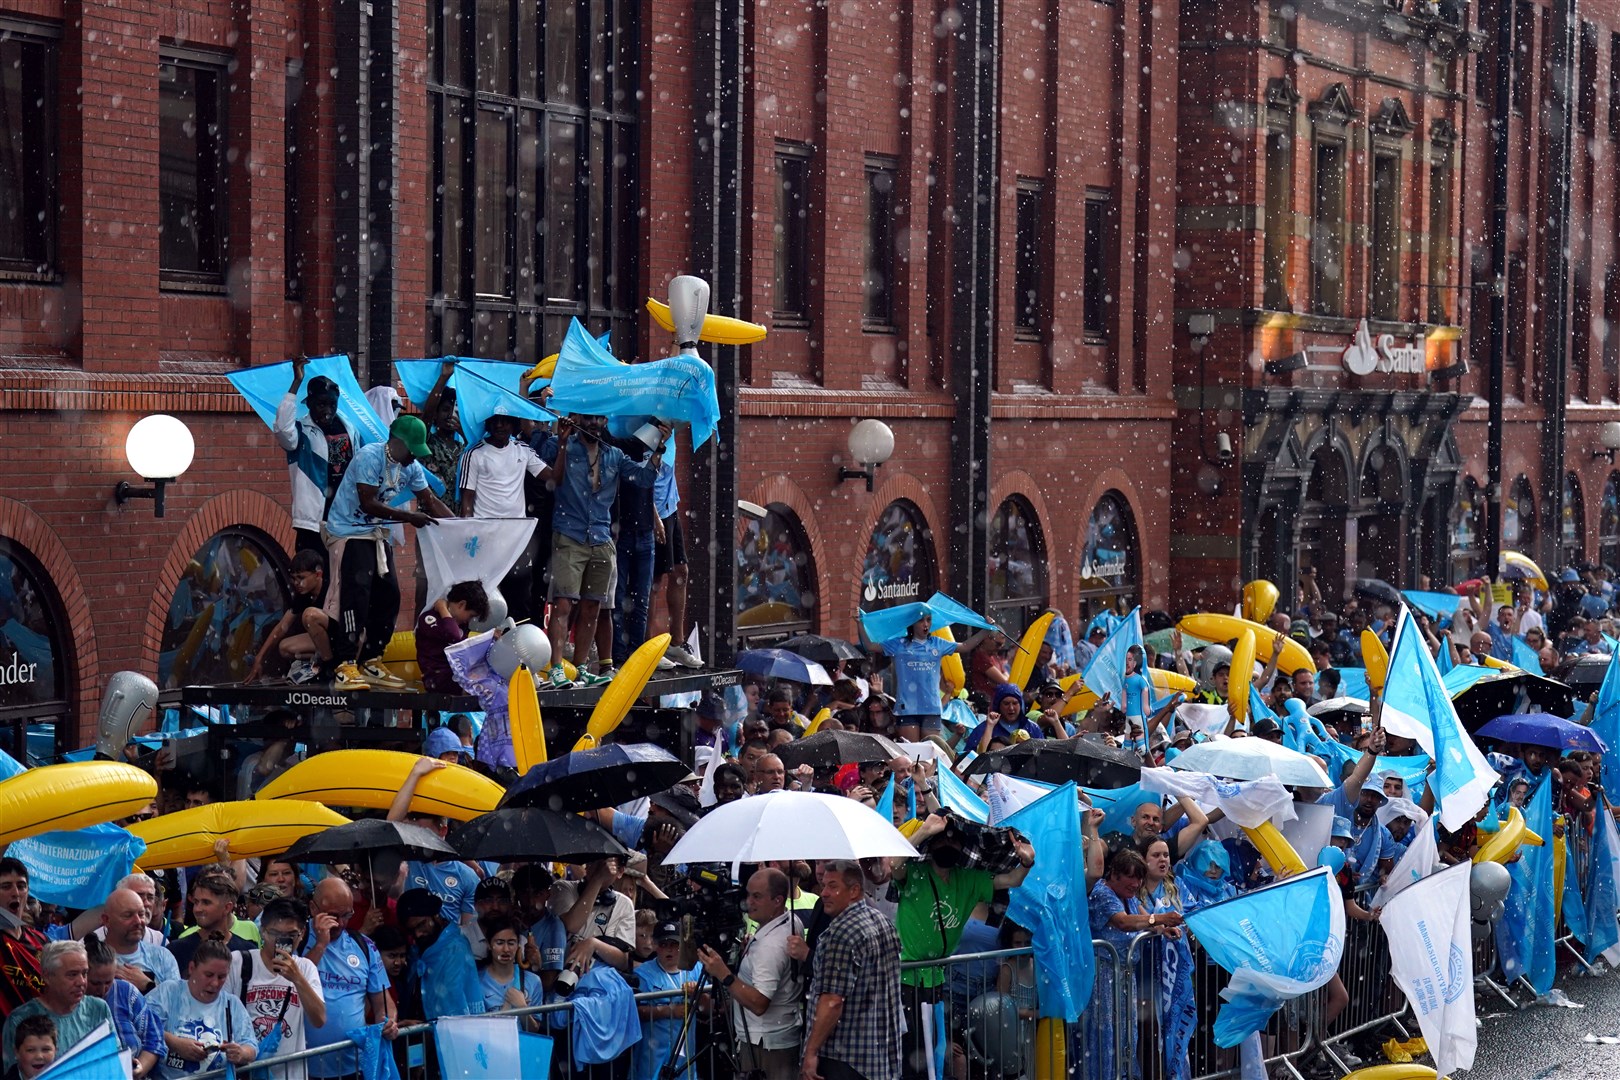 Manchester City fans take shelter from the rain (Tim Goode/PA)